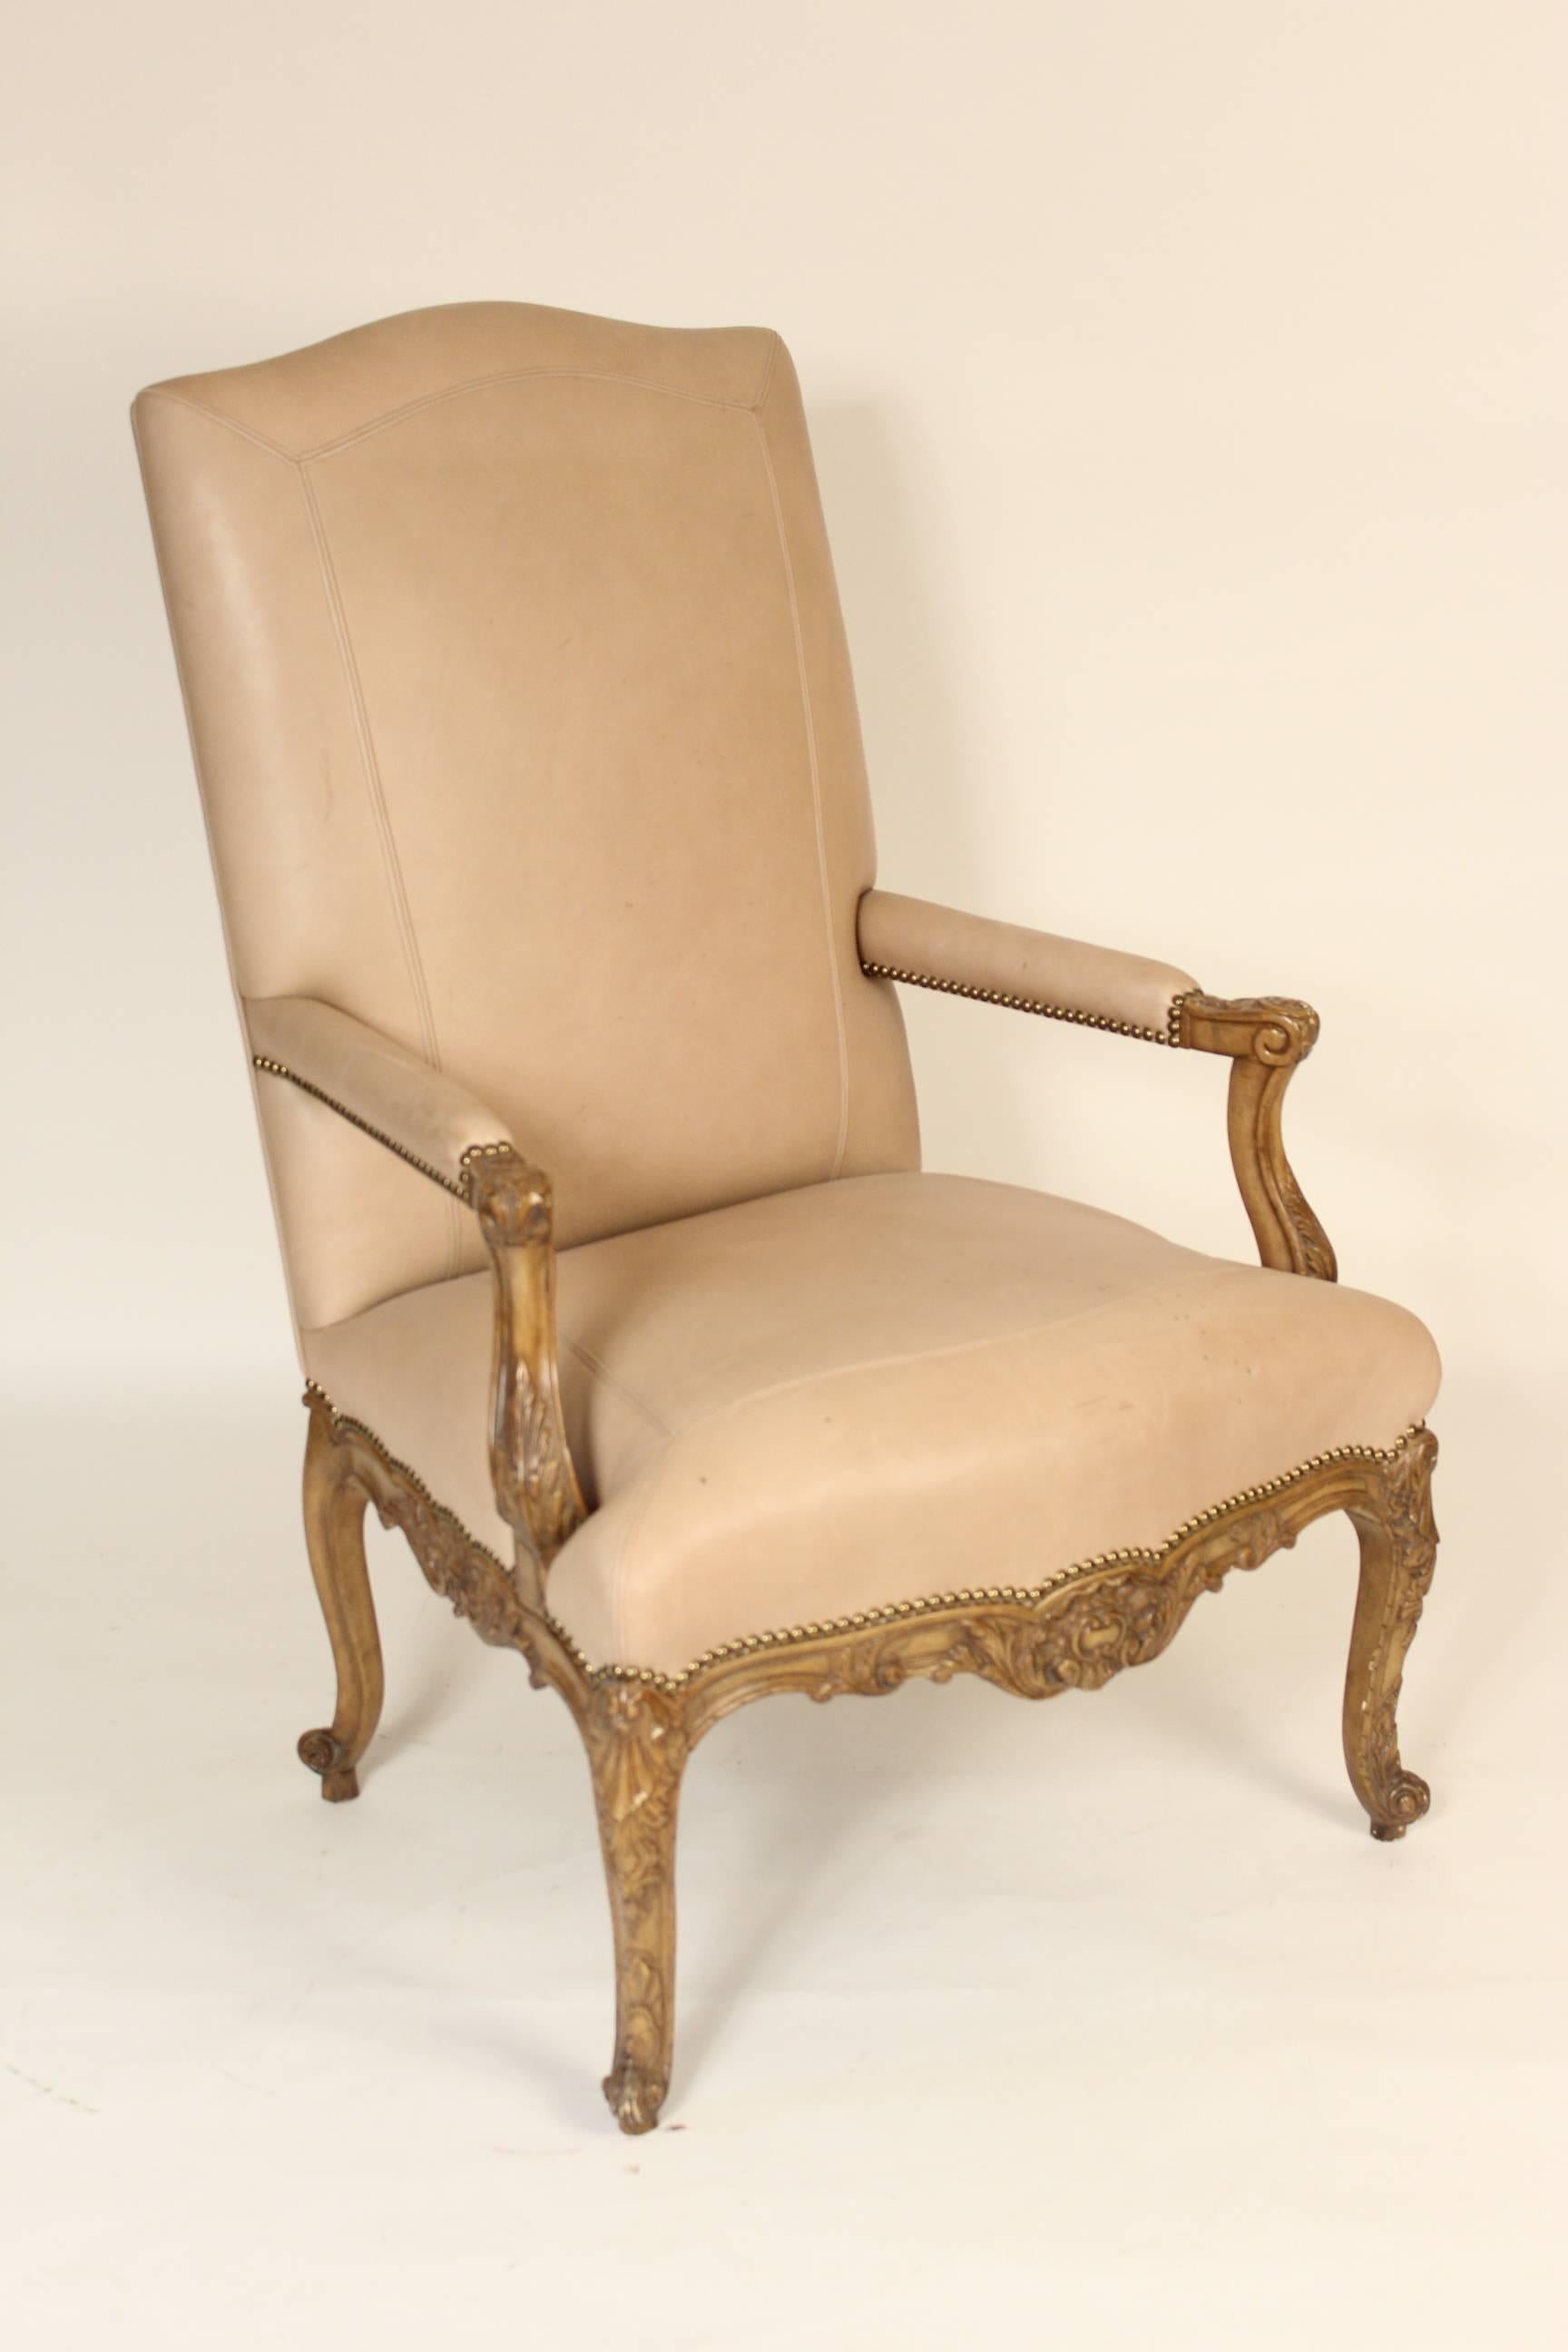 Pair of leather upholstered Louis XV style open armchairs, circa 2000.